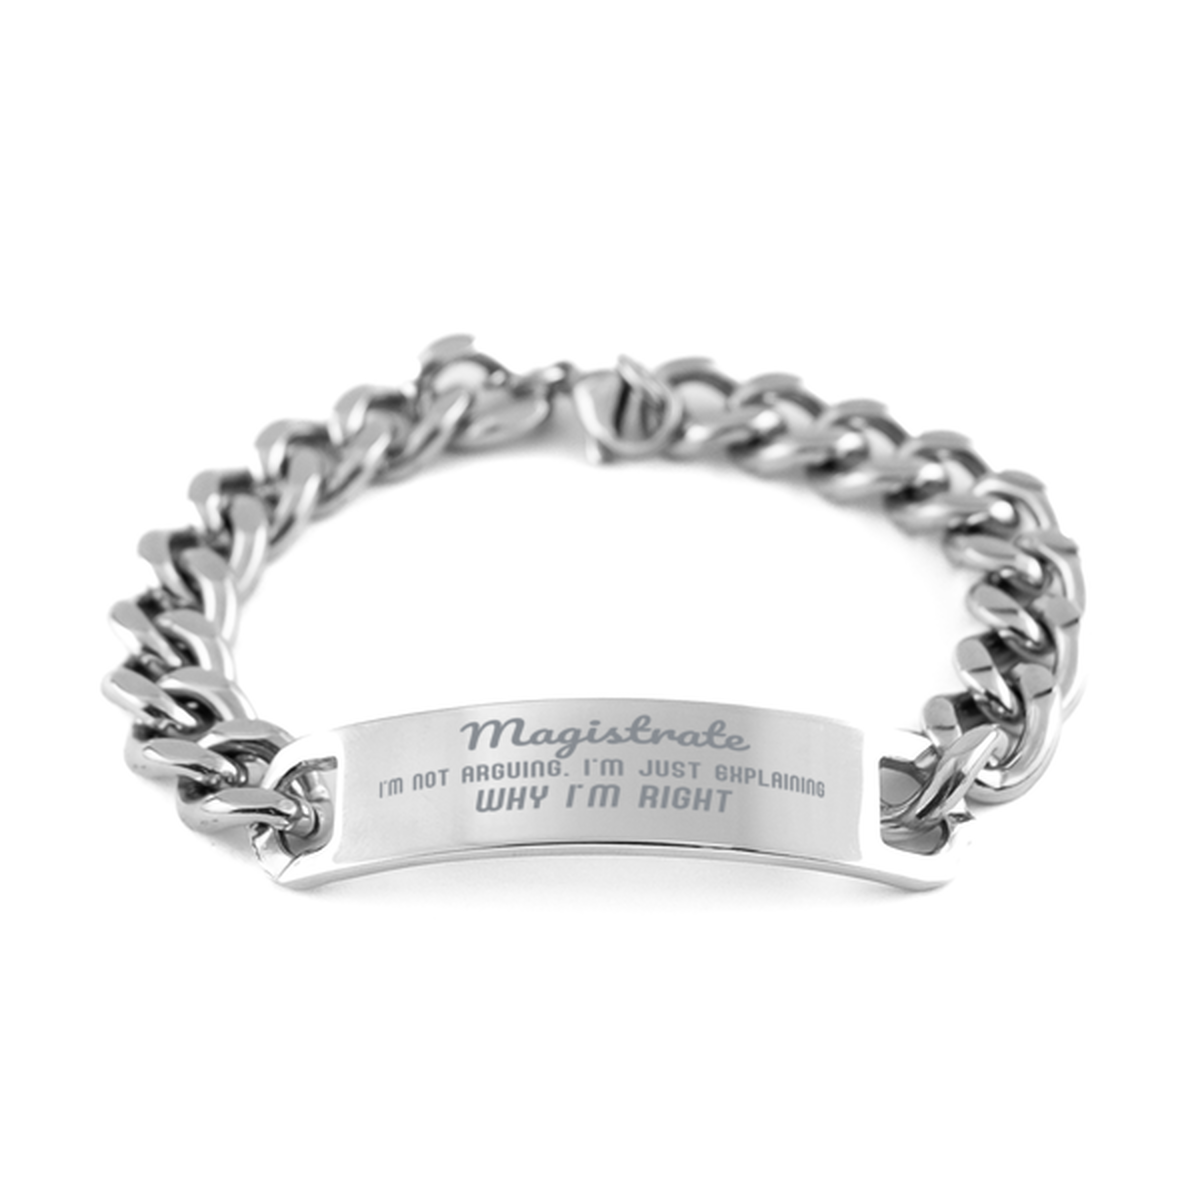 Magistrate I'm not Arguing. I'm Just Explaining Why I'm RIGHT Cuban Chain Stainless Steel Bracelet, Graduation Birthday Christmas Magistrate Gifts For Magistrate Funny Saying Quote Present for Men Women Coworker